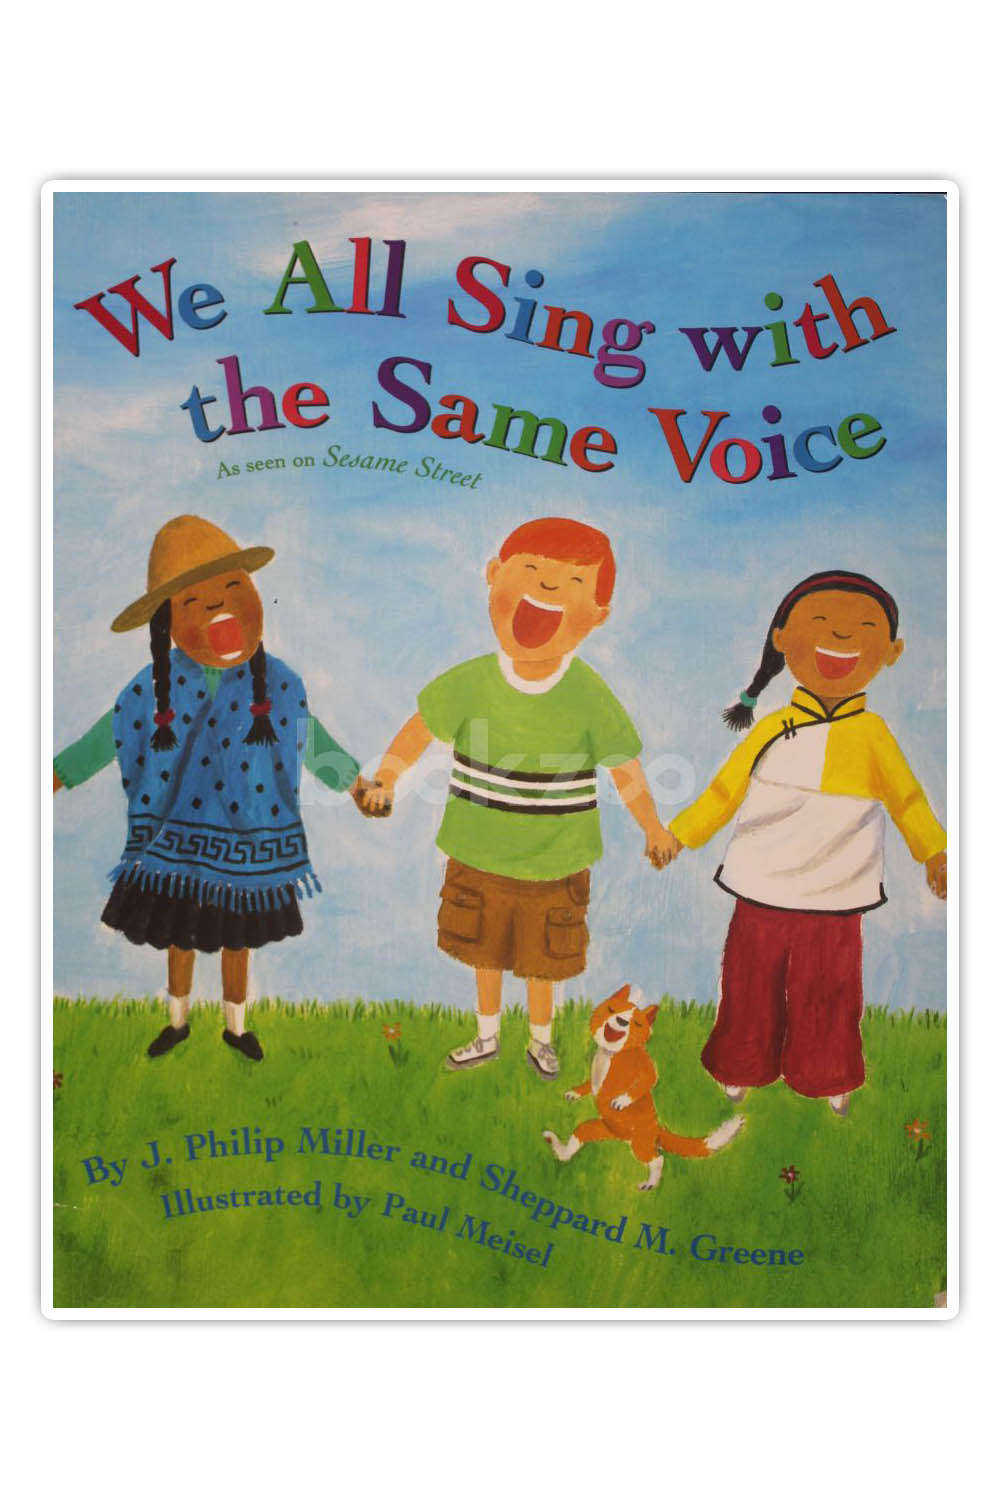 Buy　Sing　—　Online　bookstore　Sheppard　All　the　Philip　by　Same　Greene　J.　Voice　at　Miller,　M.　We　With